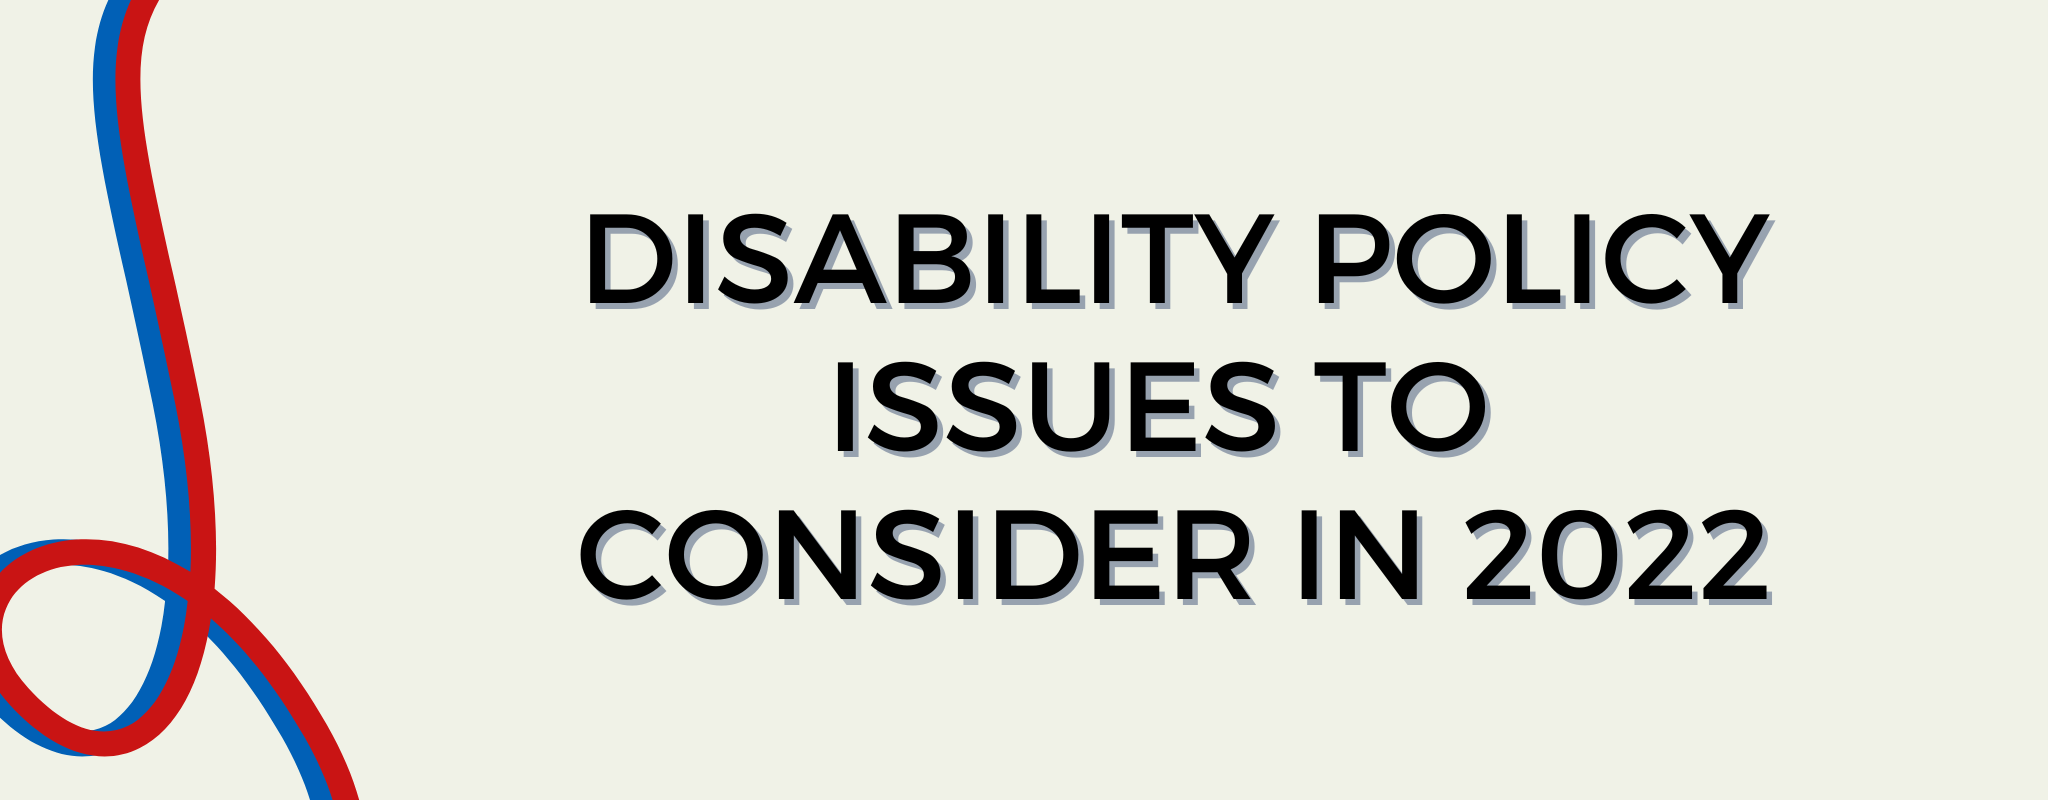 Blog banner with "Disability Policy Issues to Consider in 2022" in the center of the rectangle. There is a blue and red shape to the left of the text.